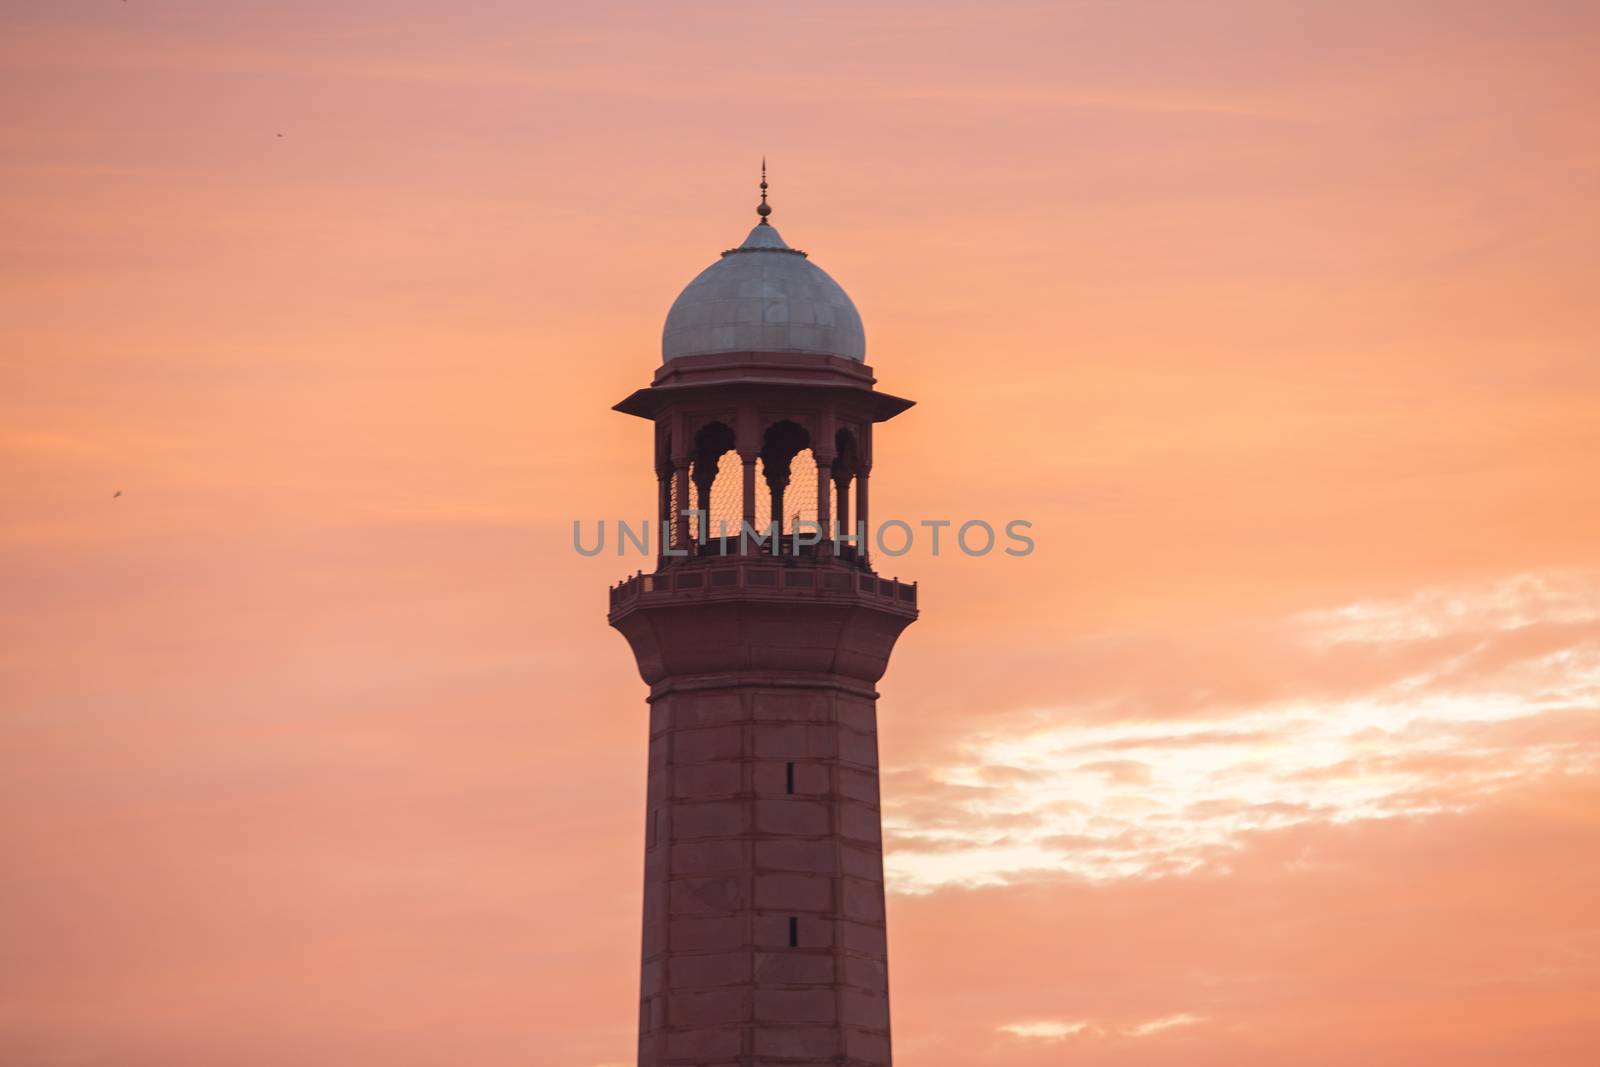 Minaret tower of a mosque calling for prayers in fiery sunset sky